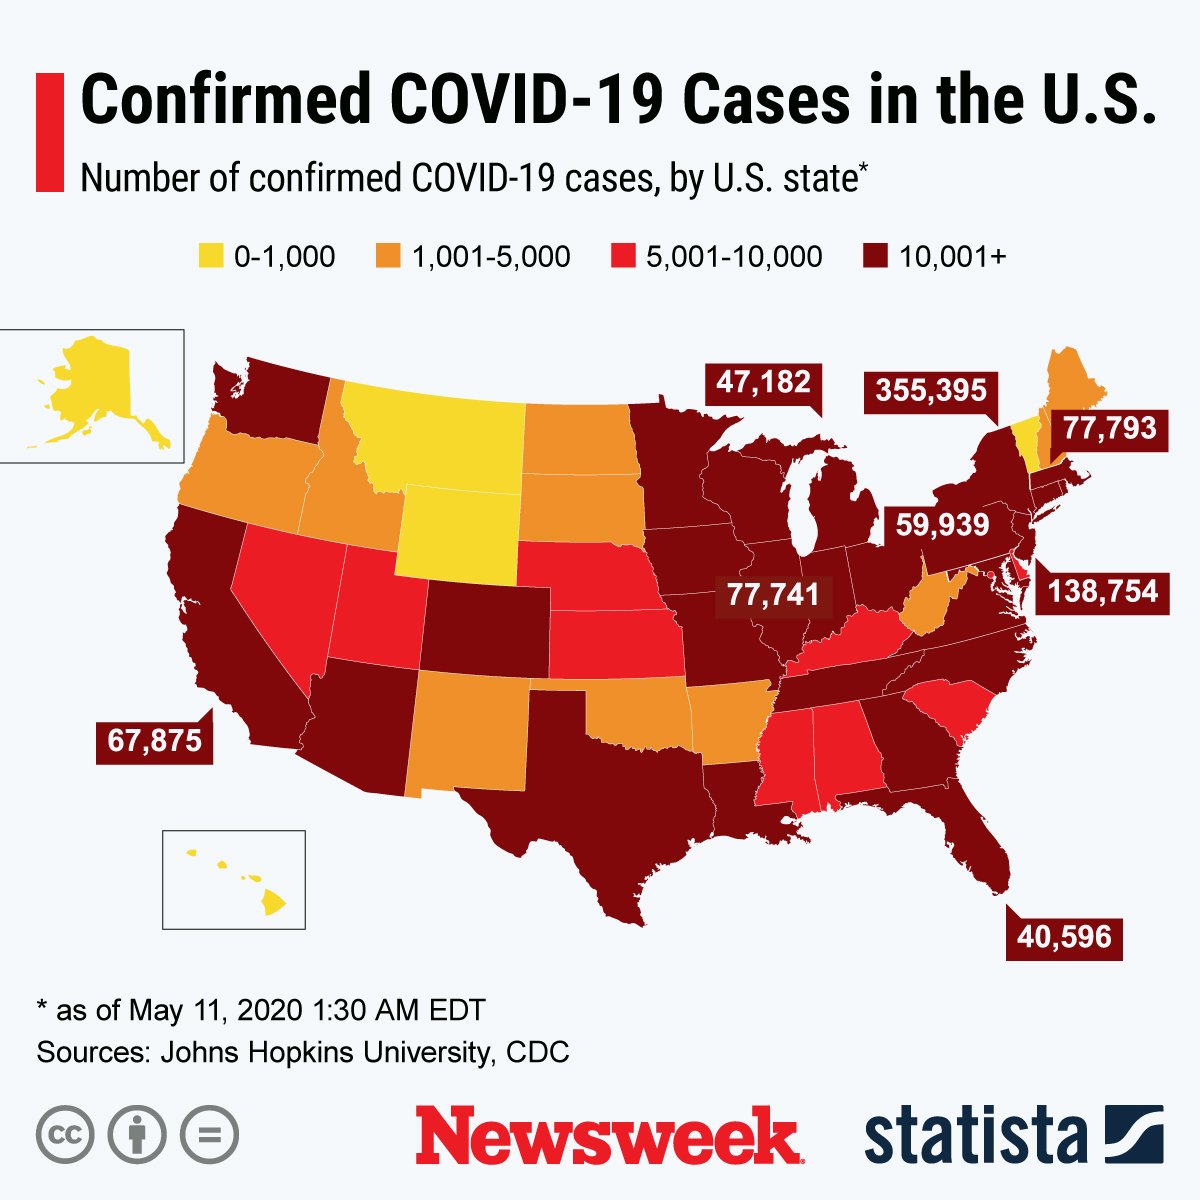 The graphic shows the number of confirmed COVID-19 cases by state.